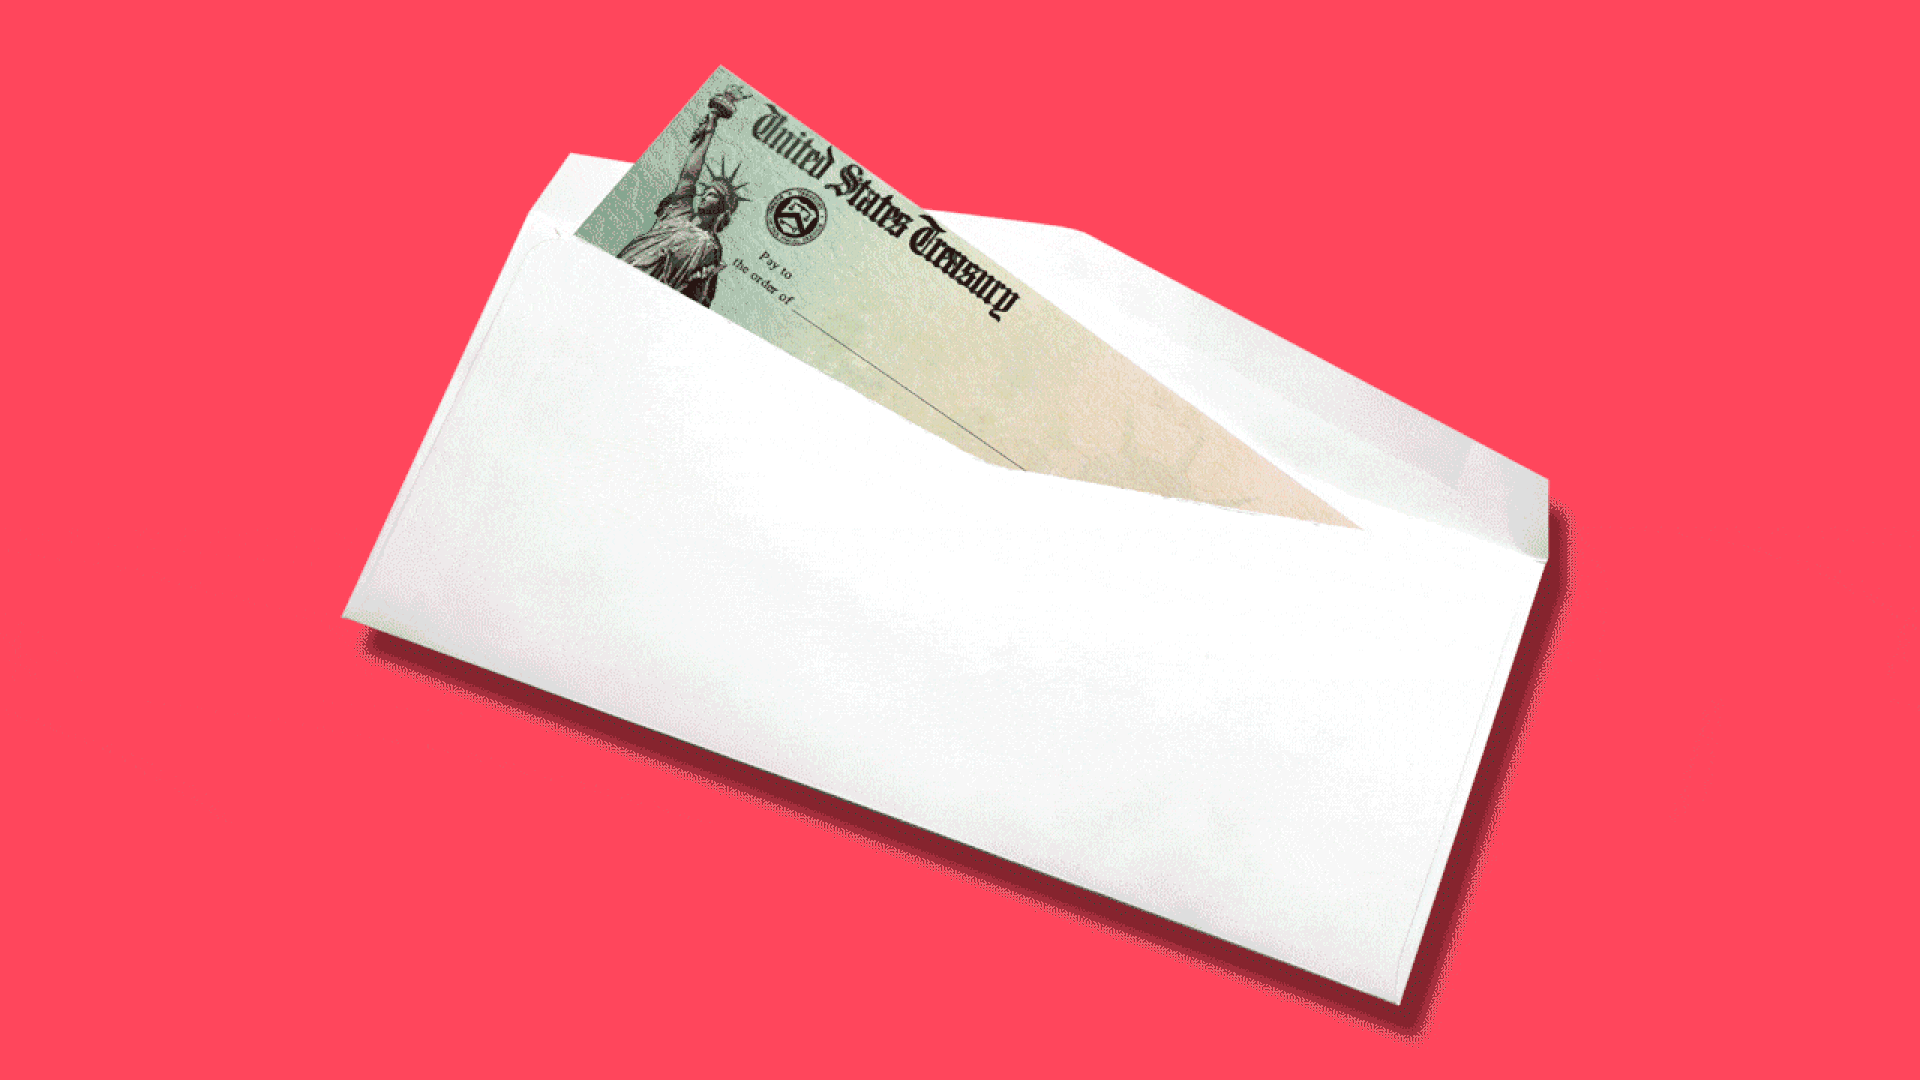 Animated illustration of a US Treasury refund check in an envelope fading away and disappearing